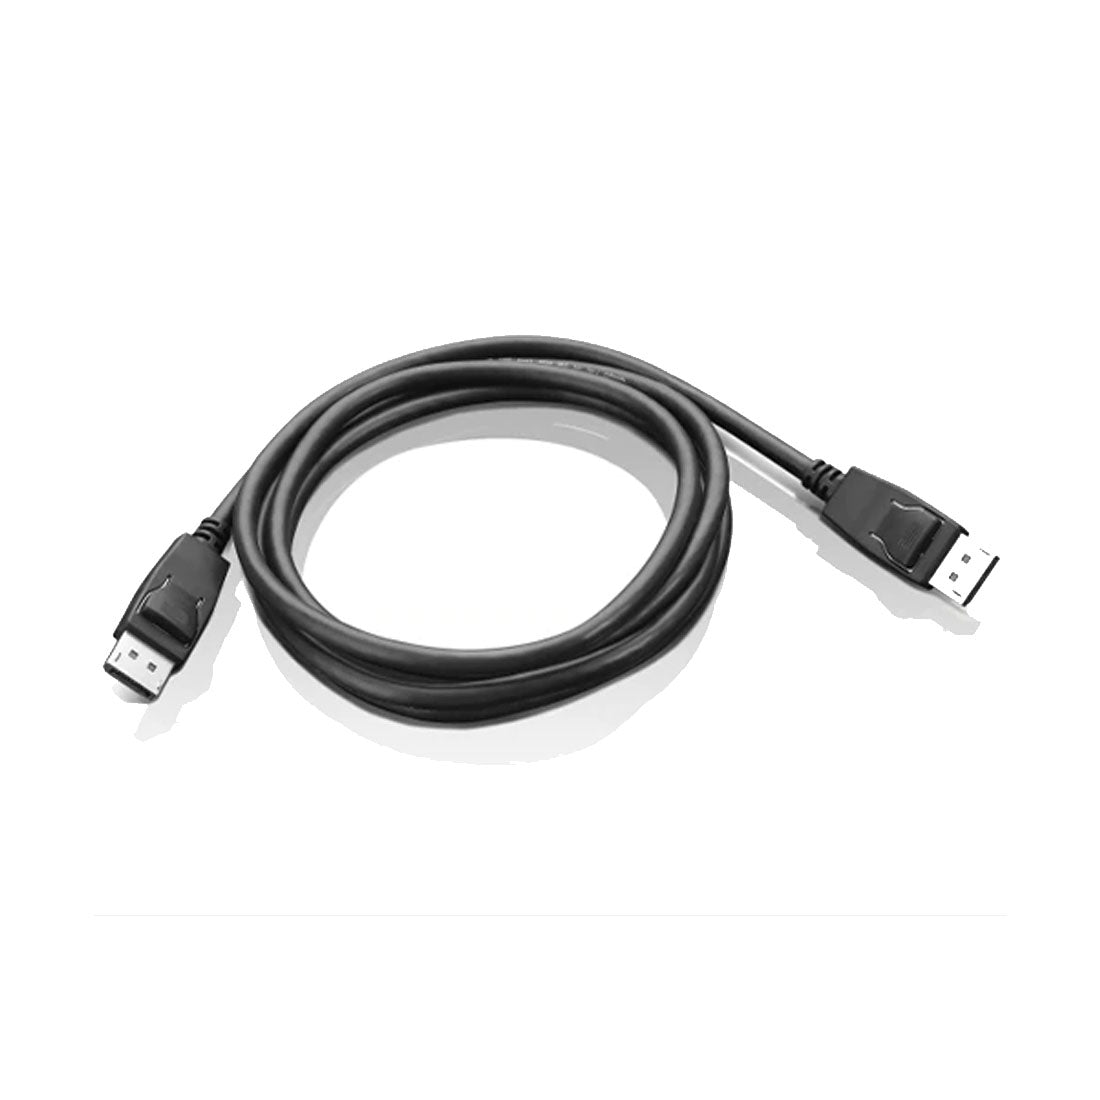 Lenovo DisplayPort to DisplayPort Cable with Resolution of up to 4K x 2K Displays